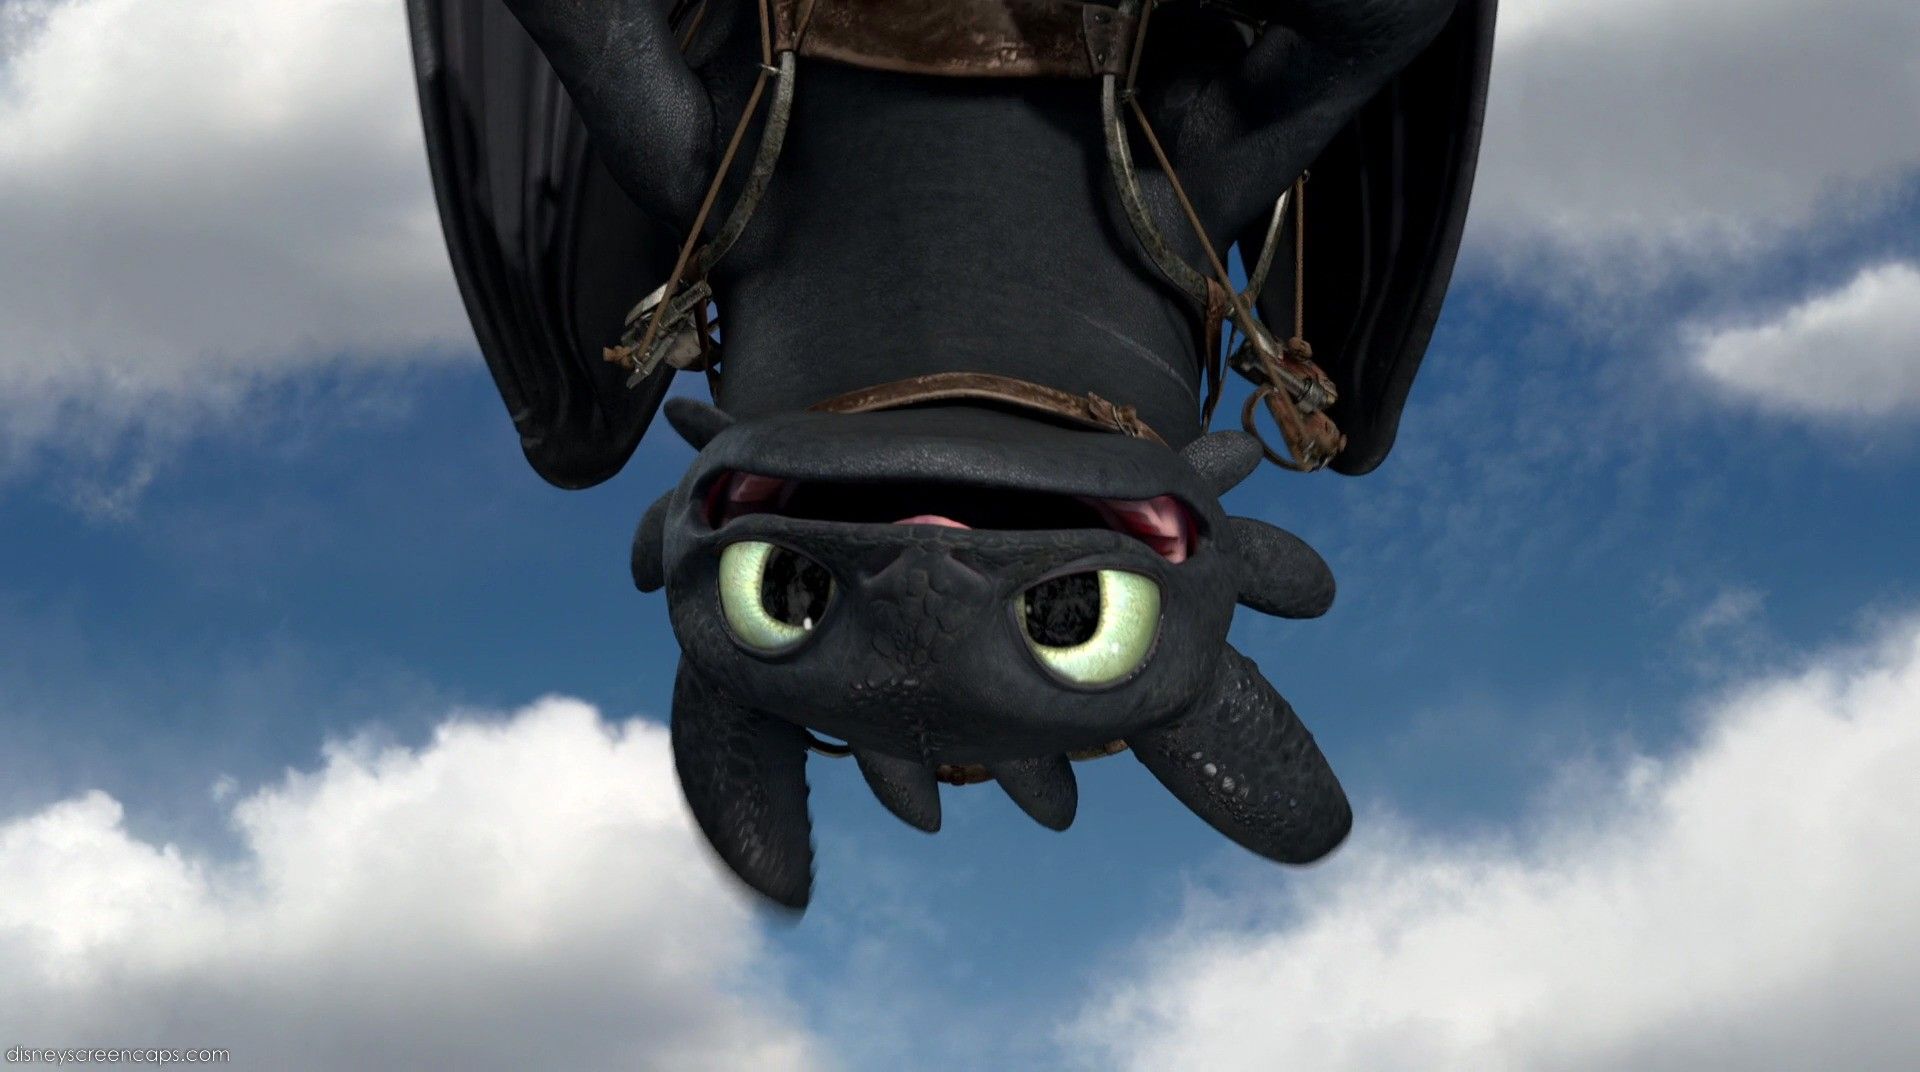 Toothless and Stitch Wallpapers on WallpaperDog